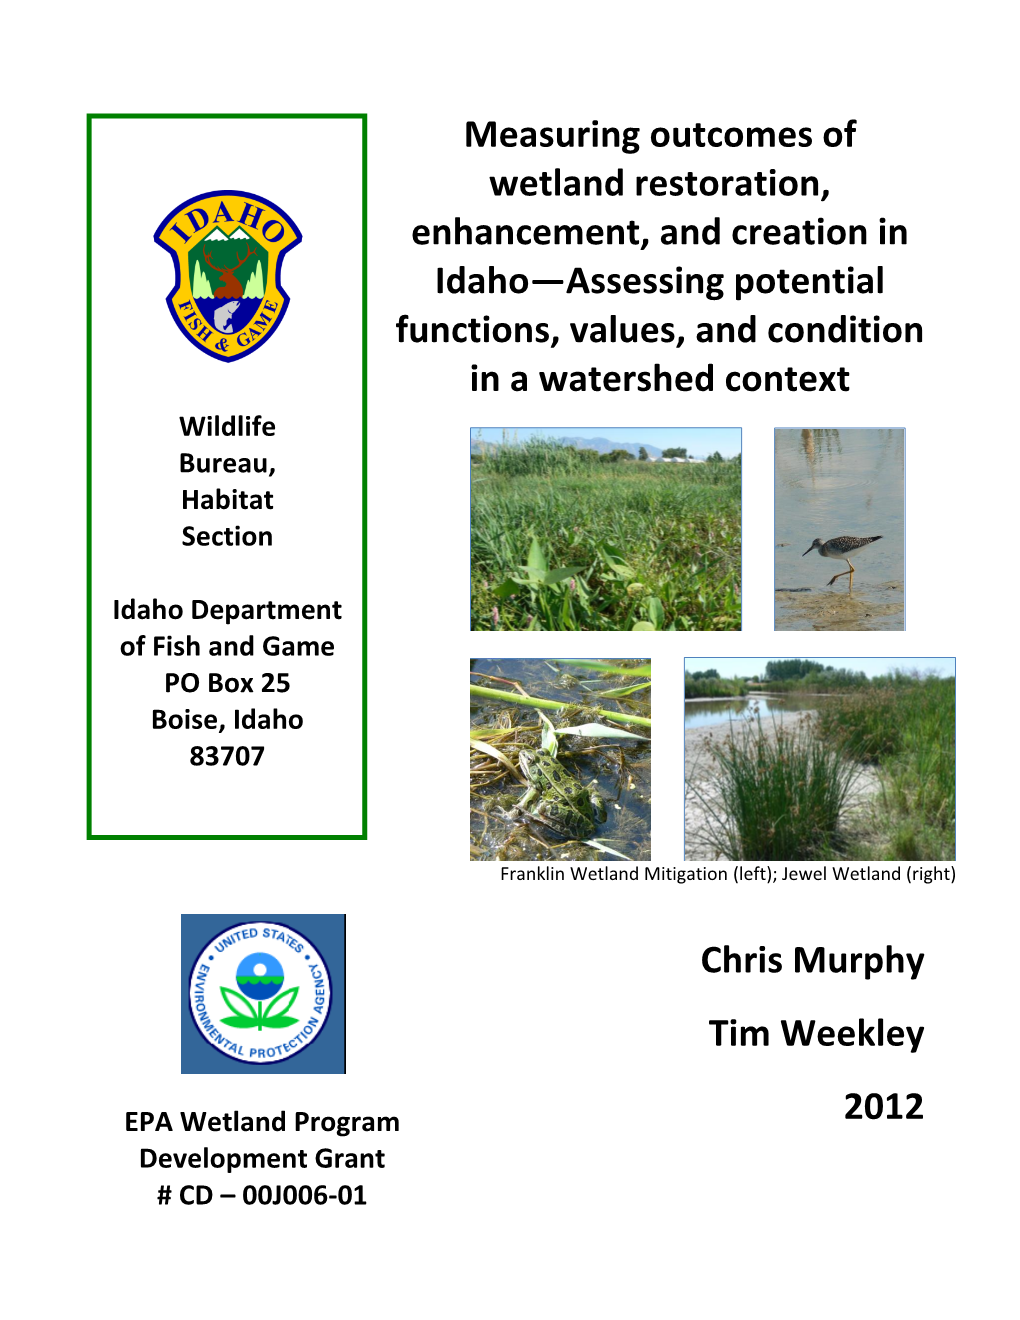 Measuring Outcomes of Wetland Restoration, Enhancement, and Creation in Idaho—Assessing Potential Functions, Values, and Condition